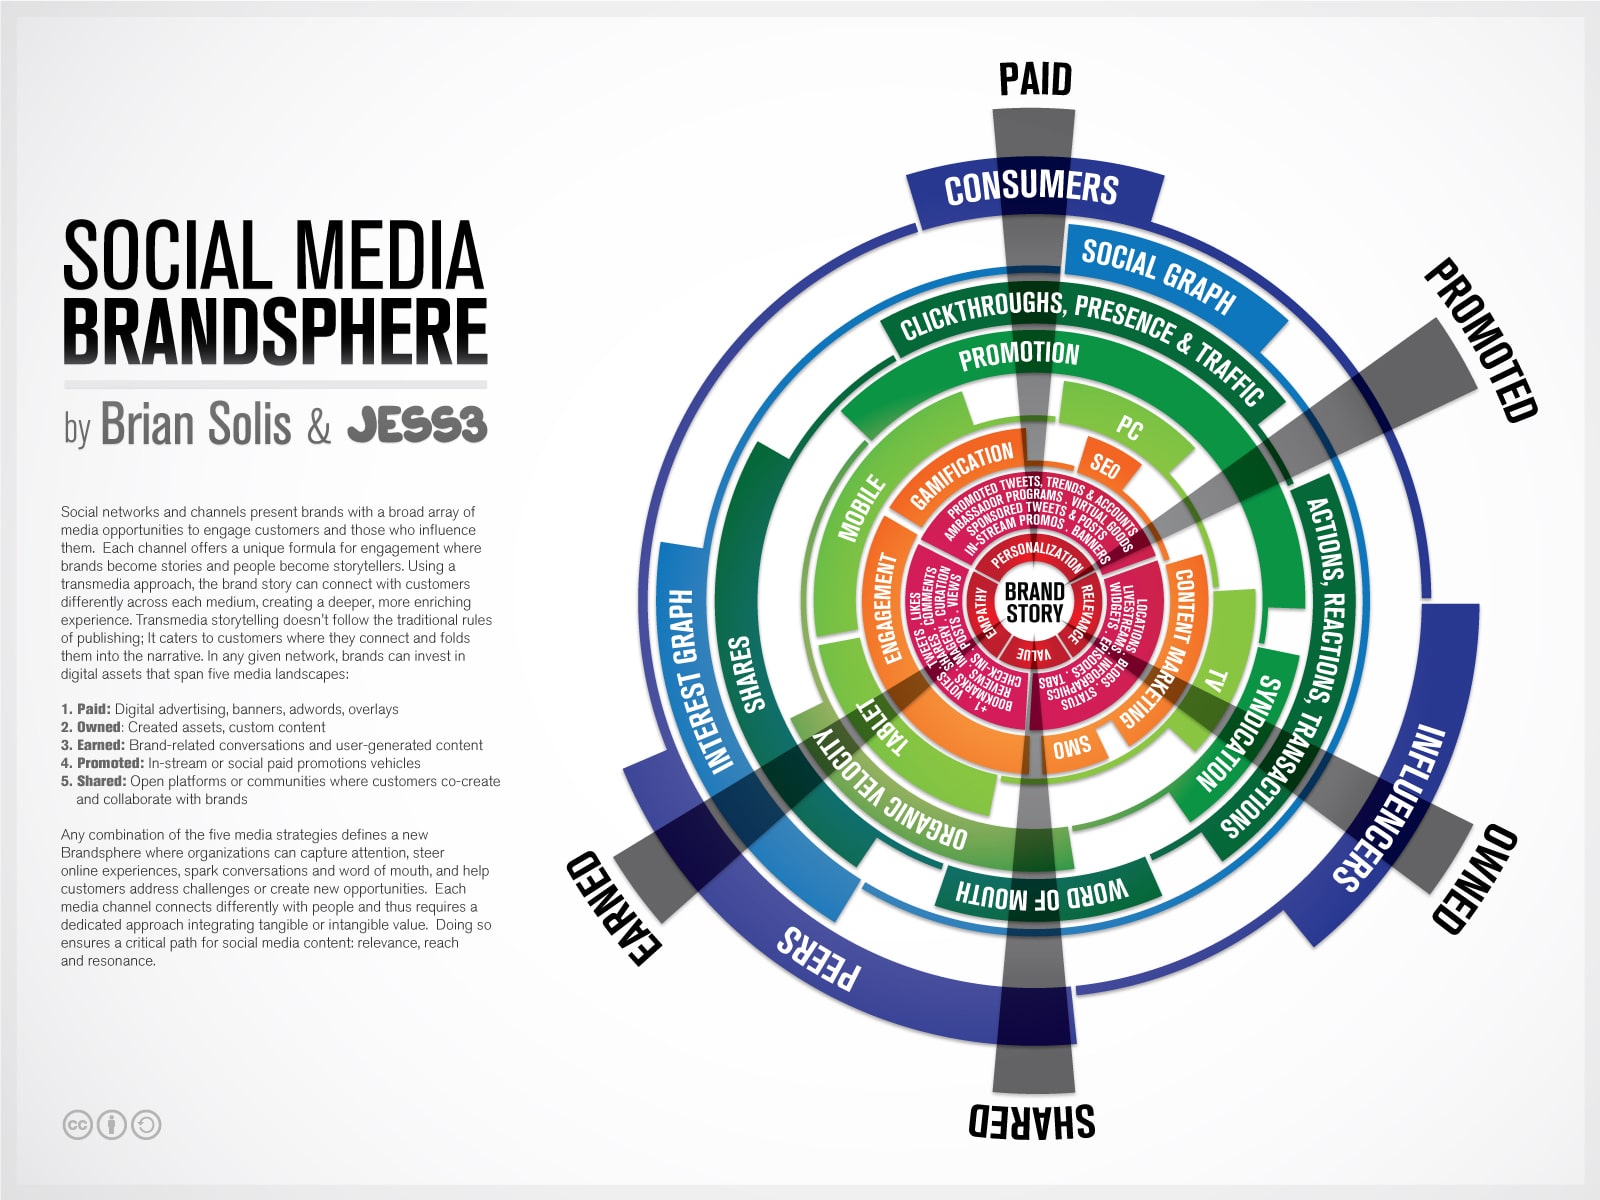 Social Media Brandsphere: Charting 5 Approaches [Infographic]